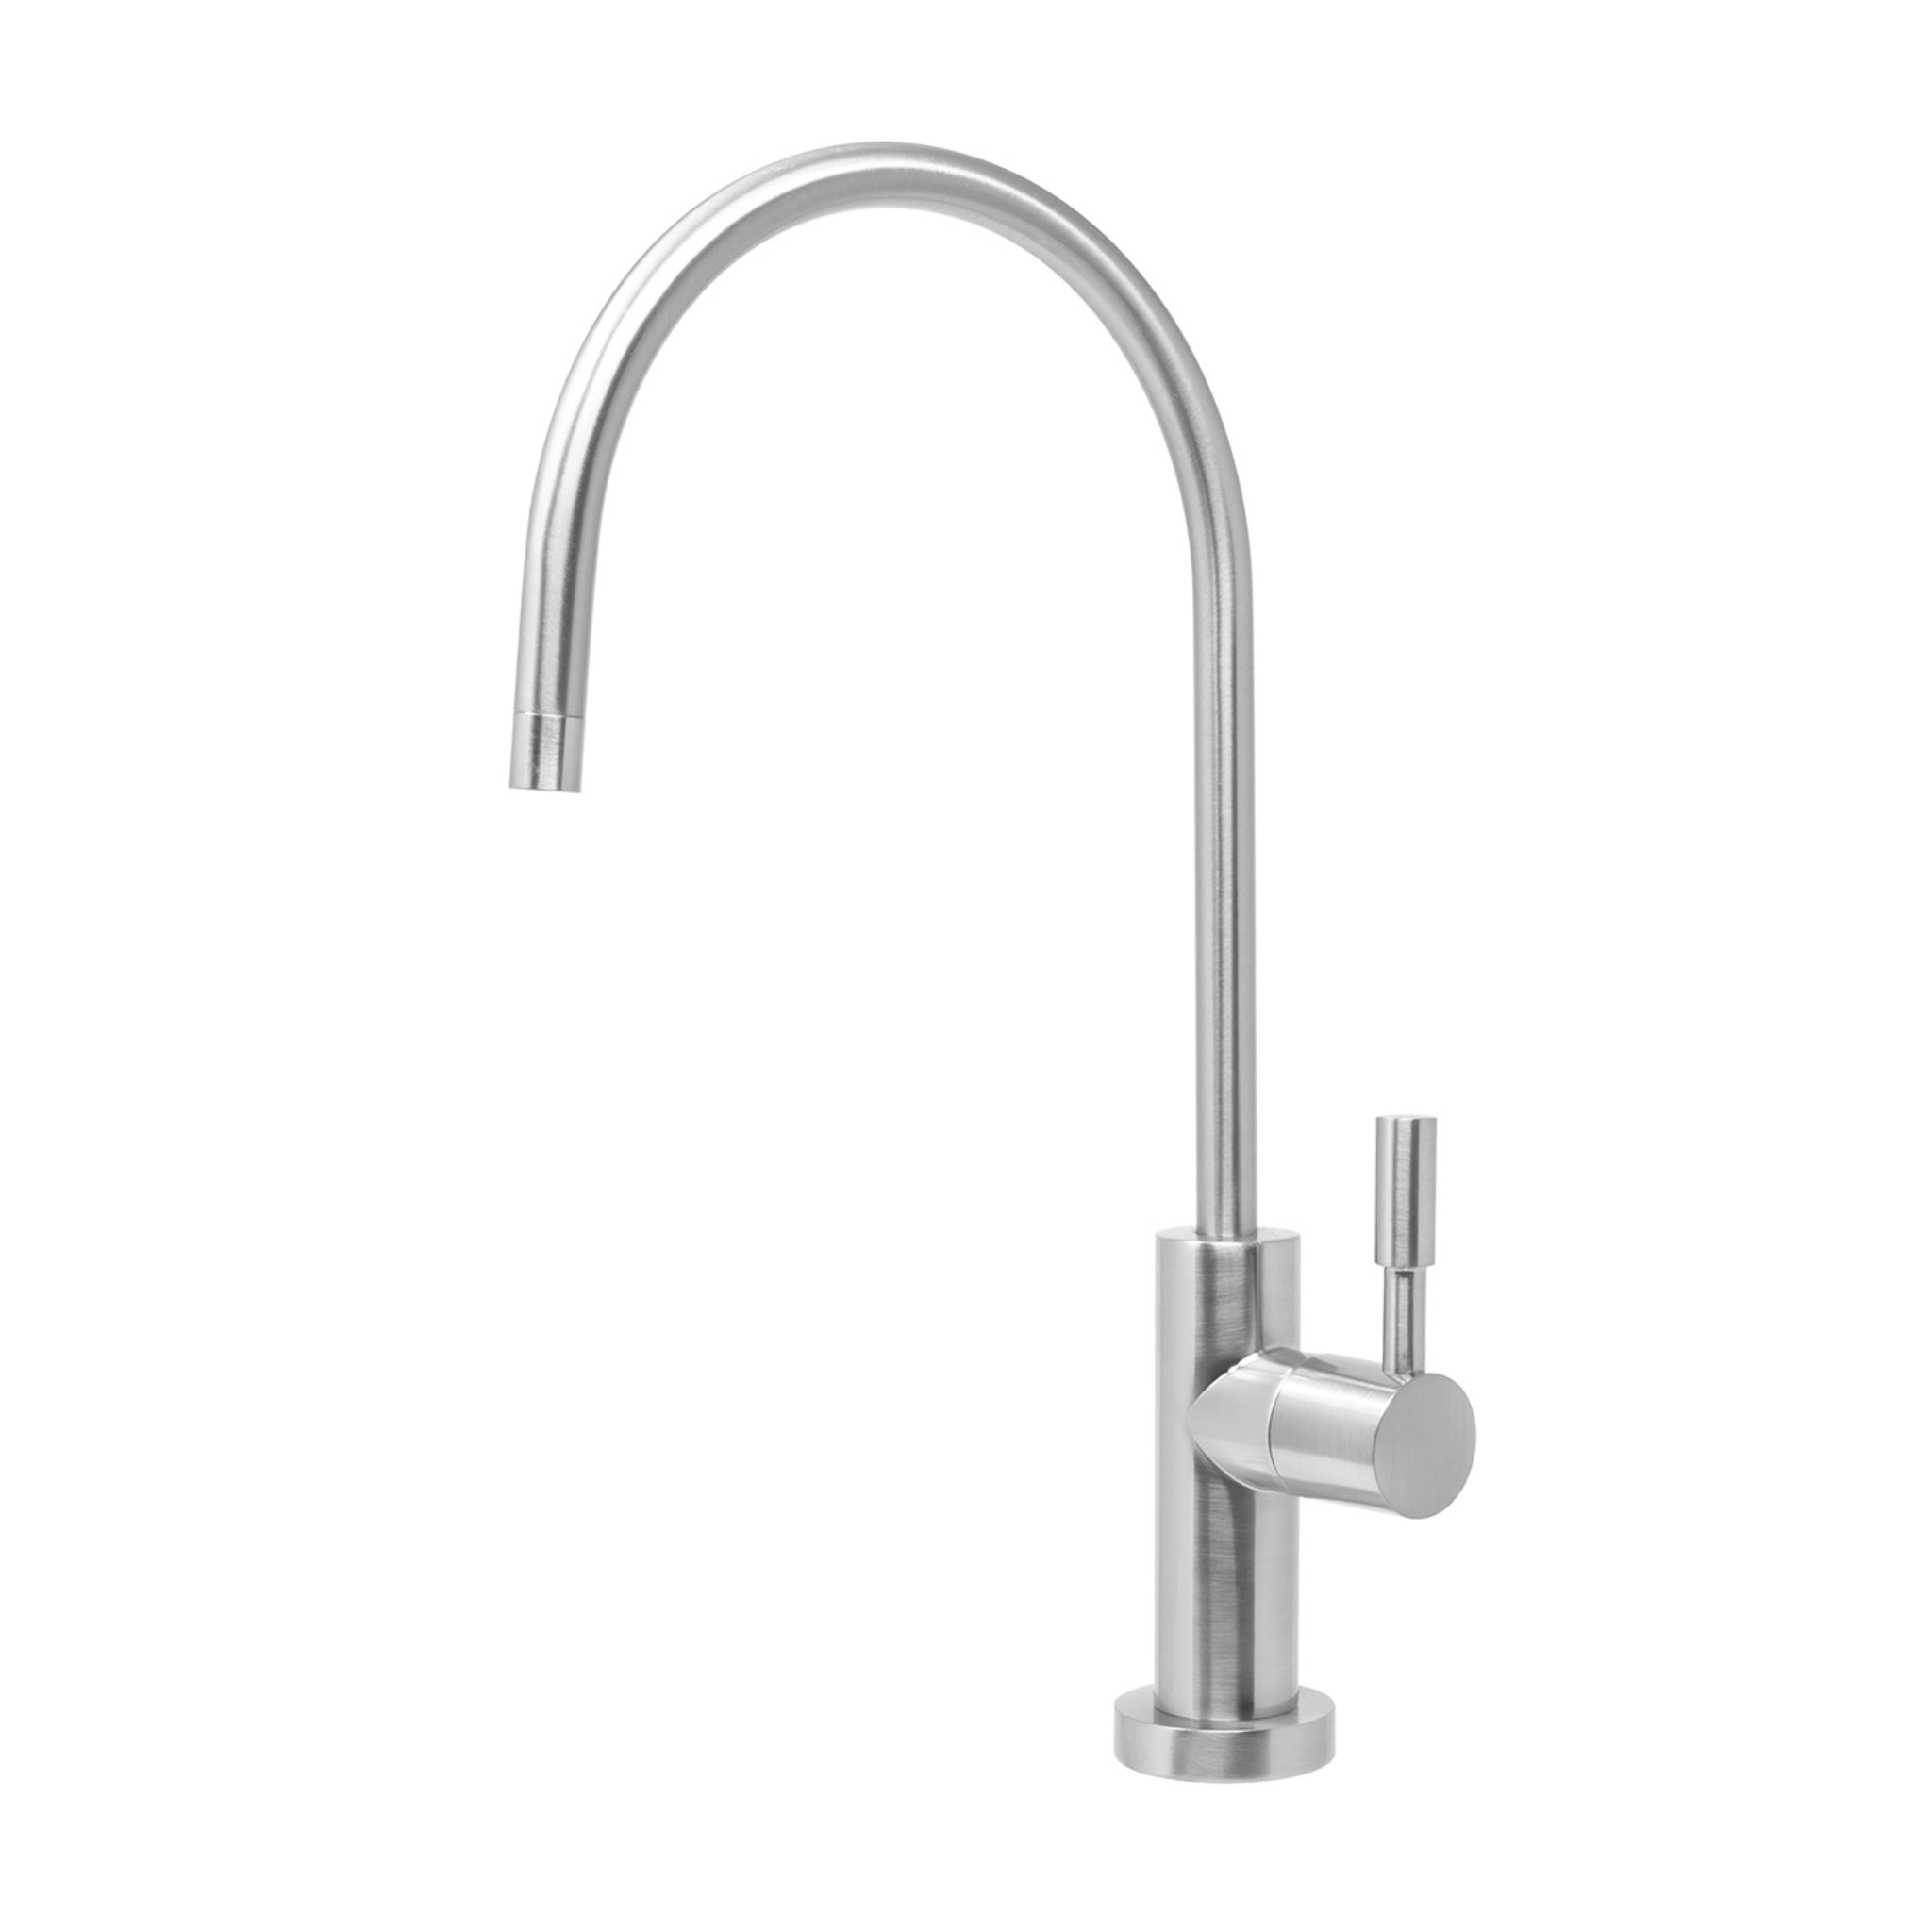 A metpure large euro brushed nickel ro water filtration wholesale faucet.